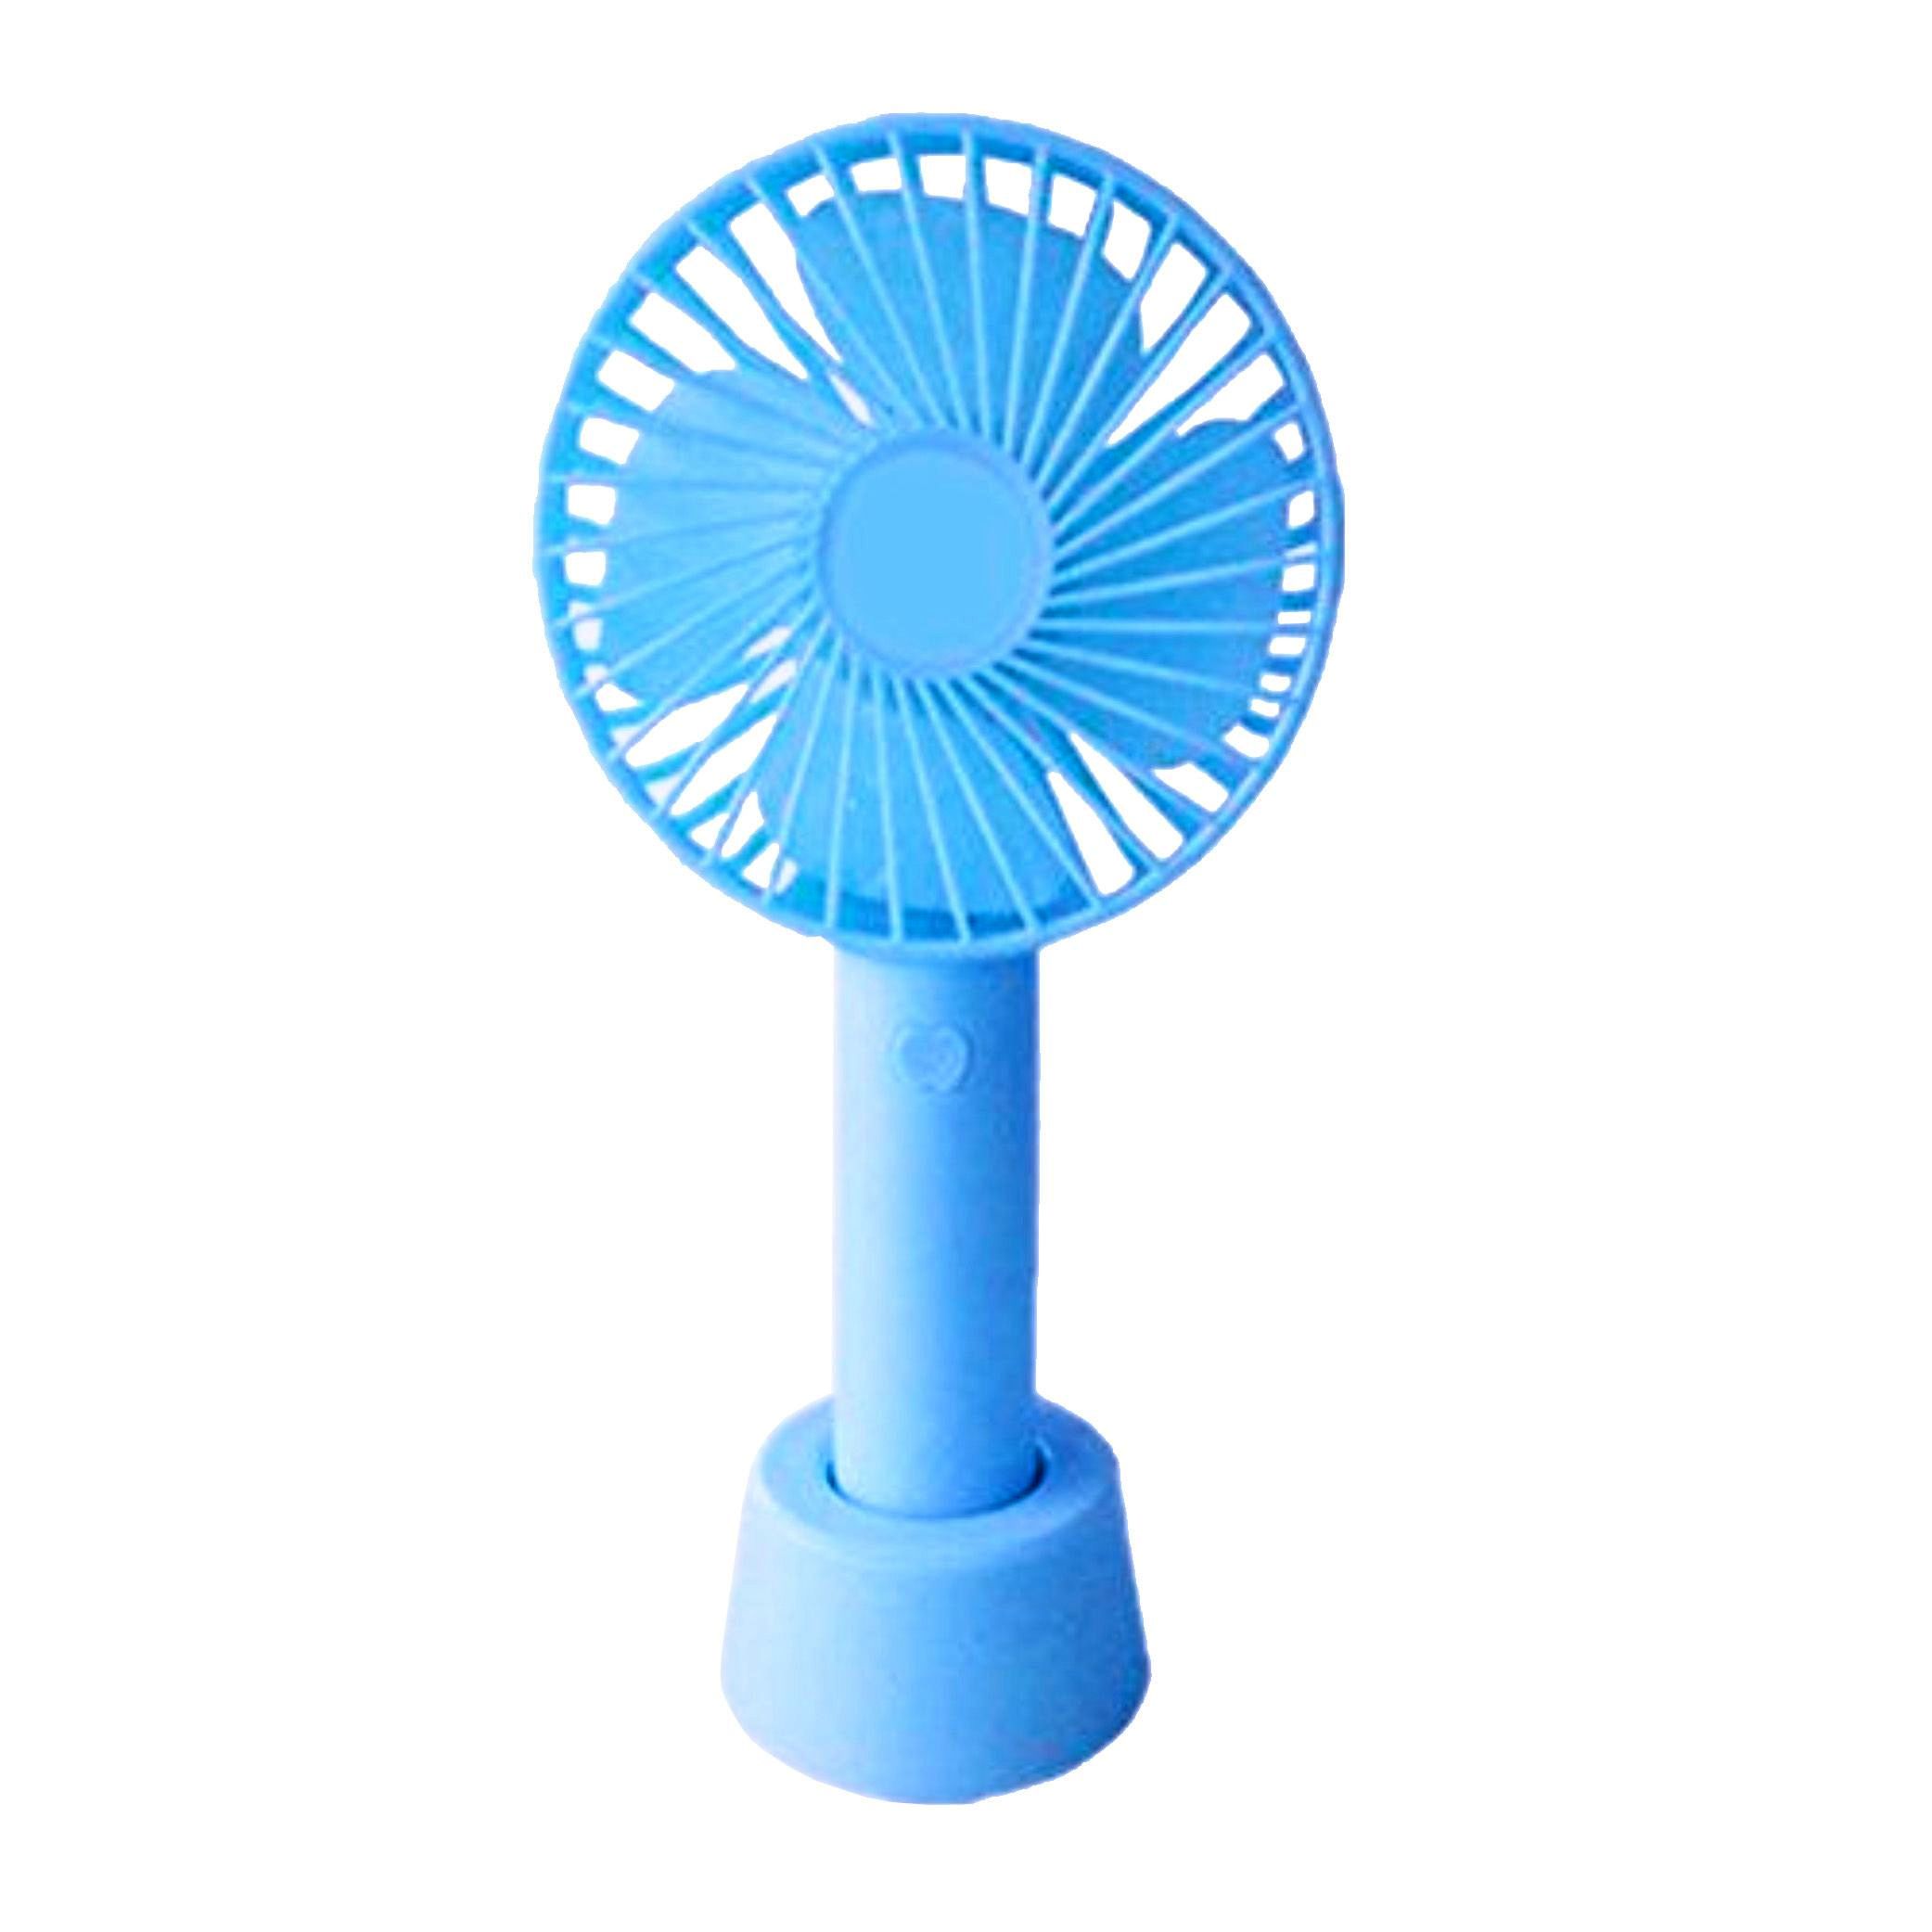 Mini Handheld Fan with Base - 800mAh USB Rechargeable Battery